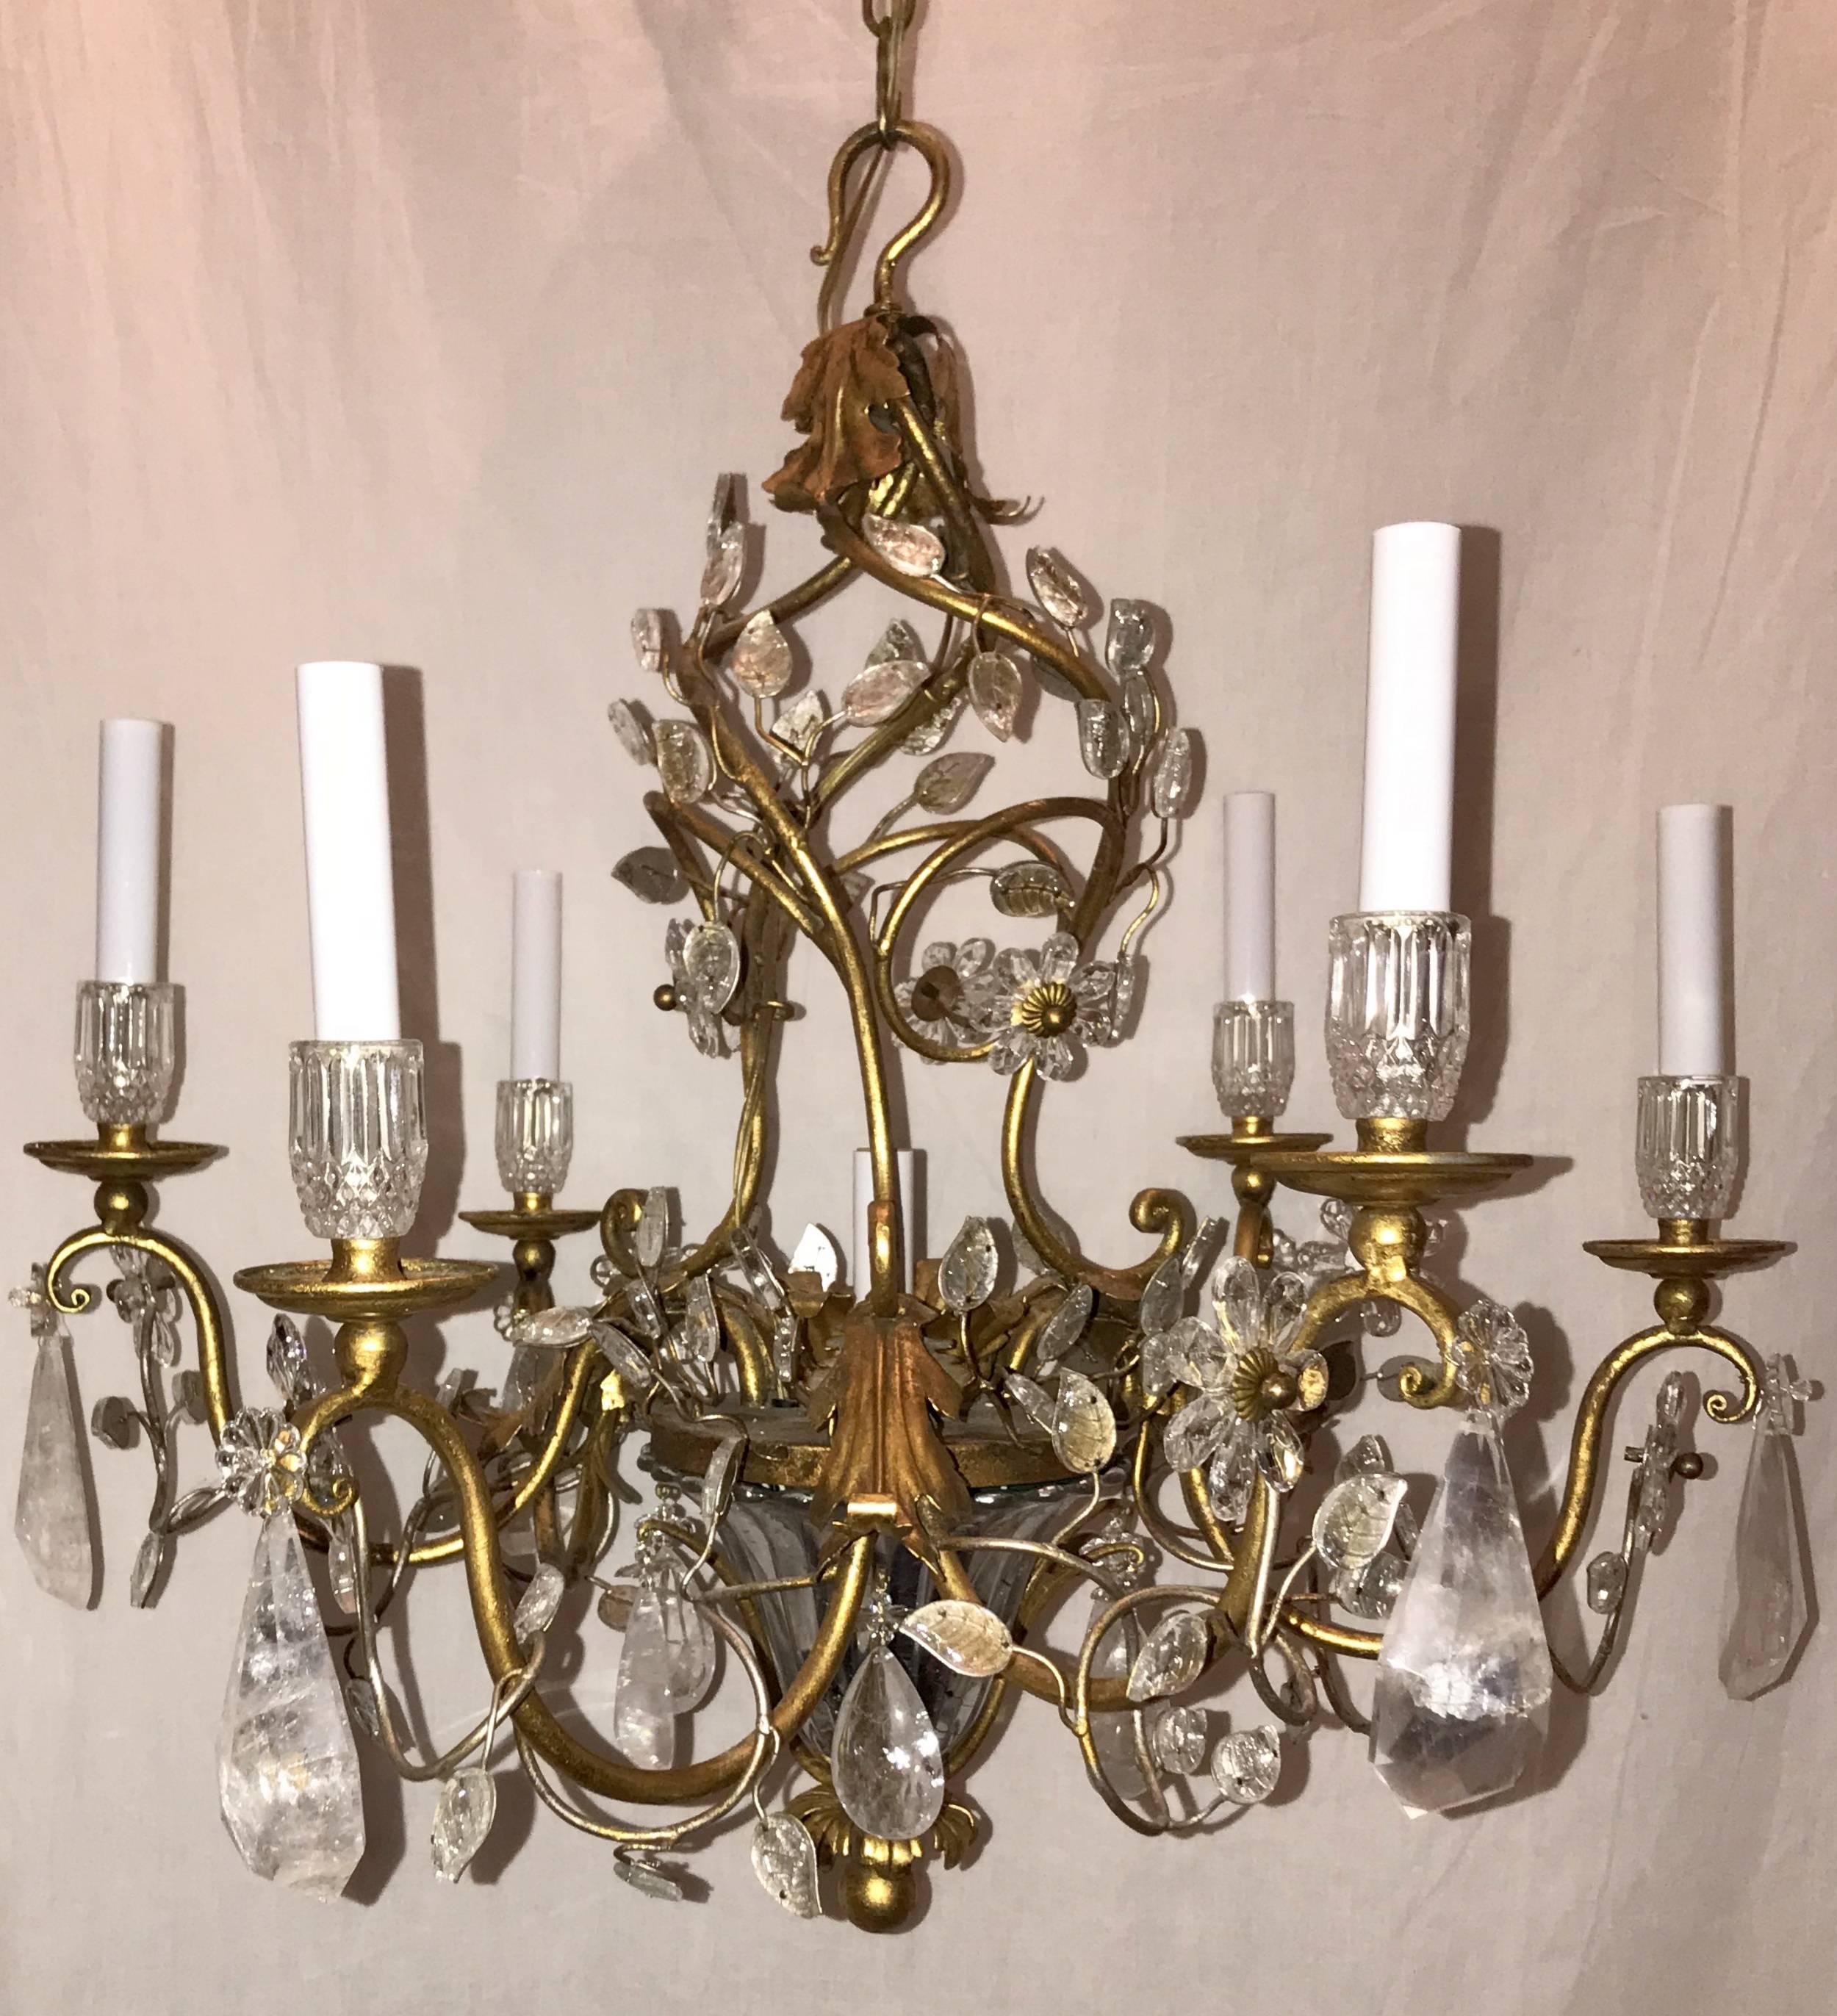 A Beautiful French gold gilt midcentury Baguès style, rock crystal and leaf basket form chandelier with six candelabrum lights
 
Actual measurements:
27